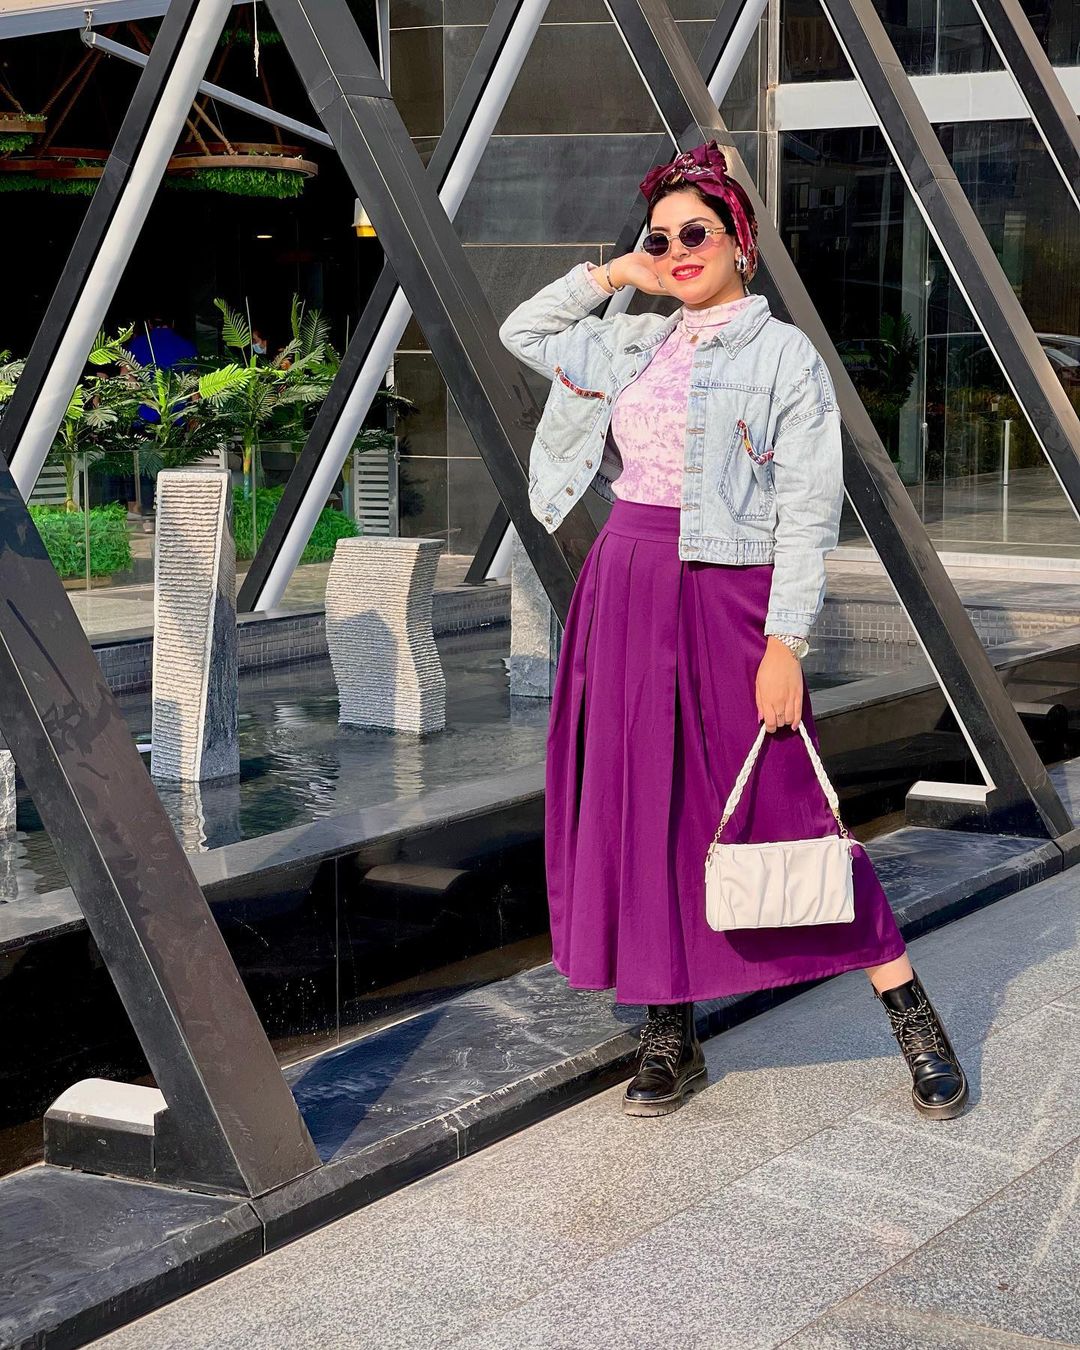 How to Style Purple Skirt 25 Outfit Ideas